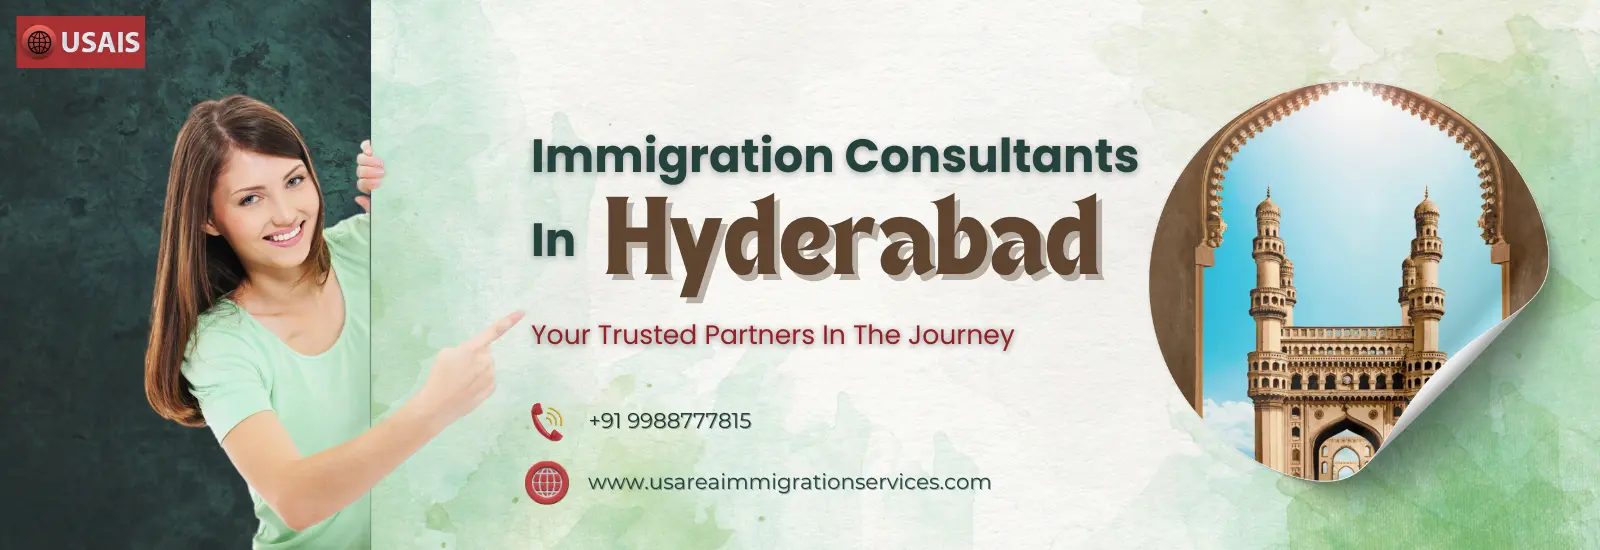 Immigration-Consultants-In-Hyderabad